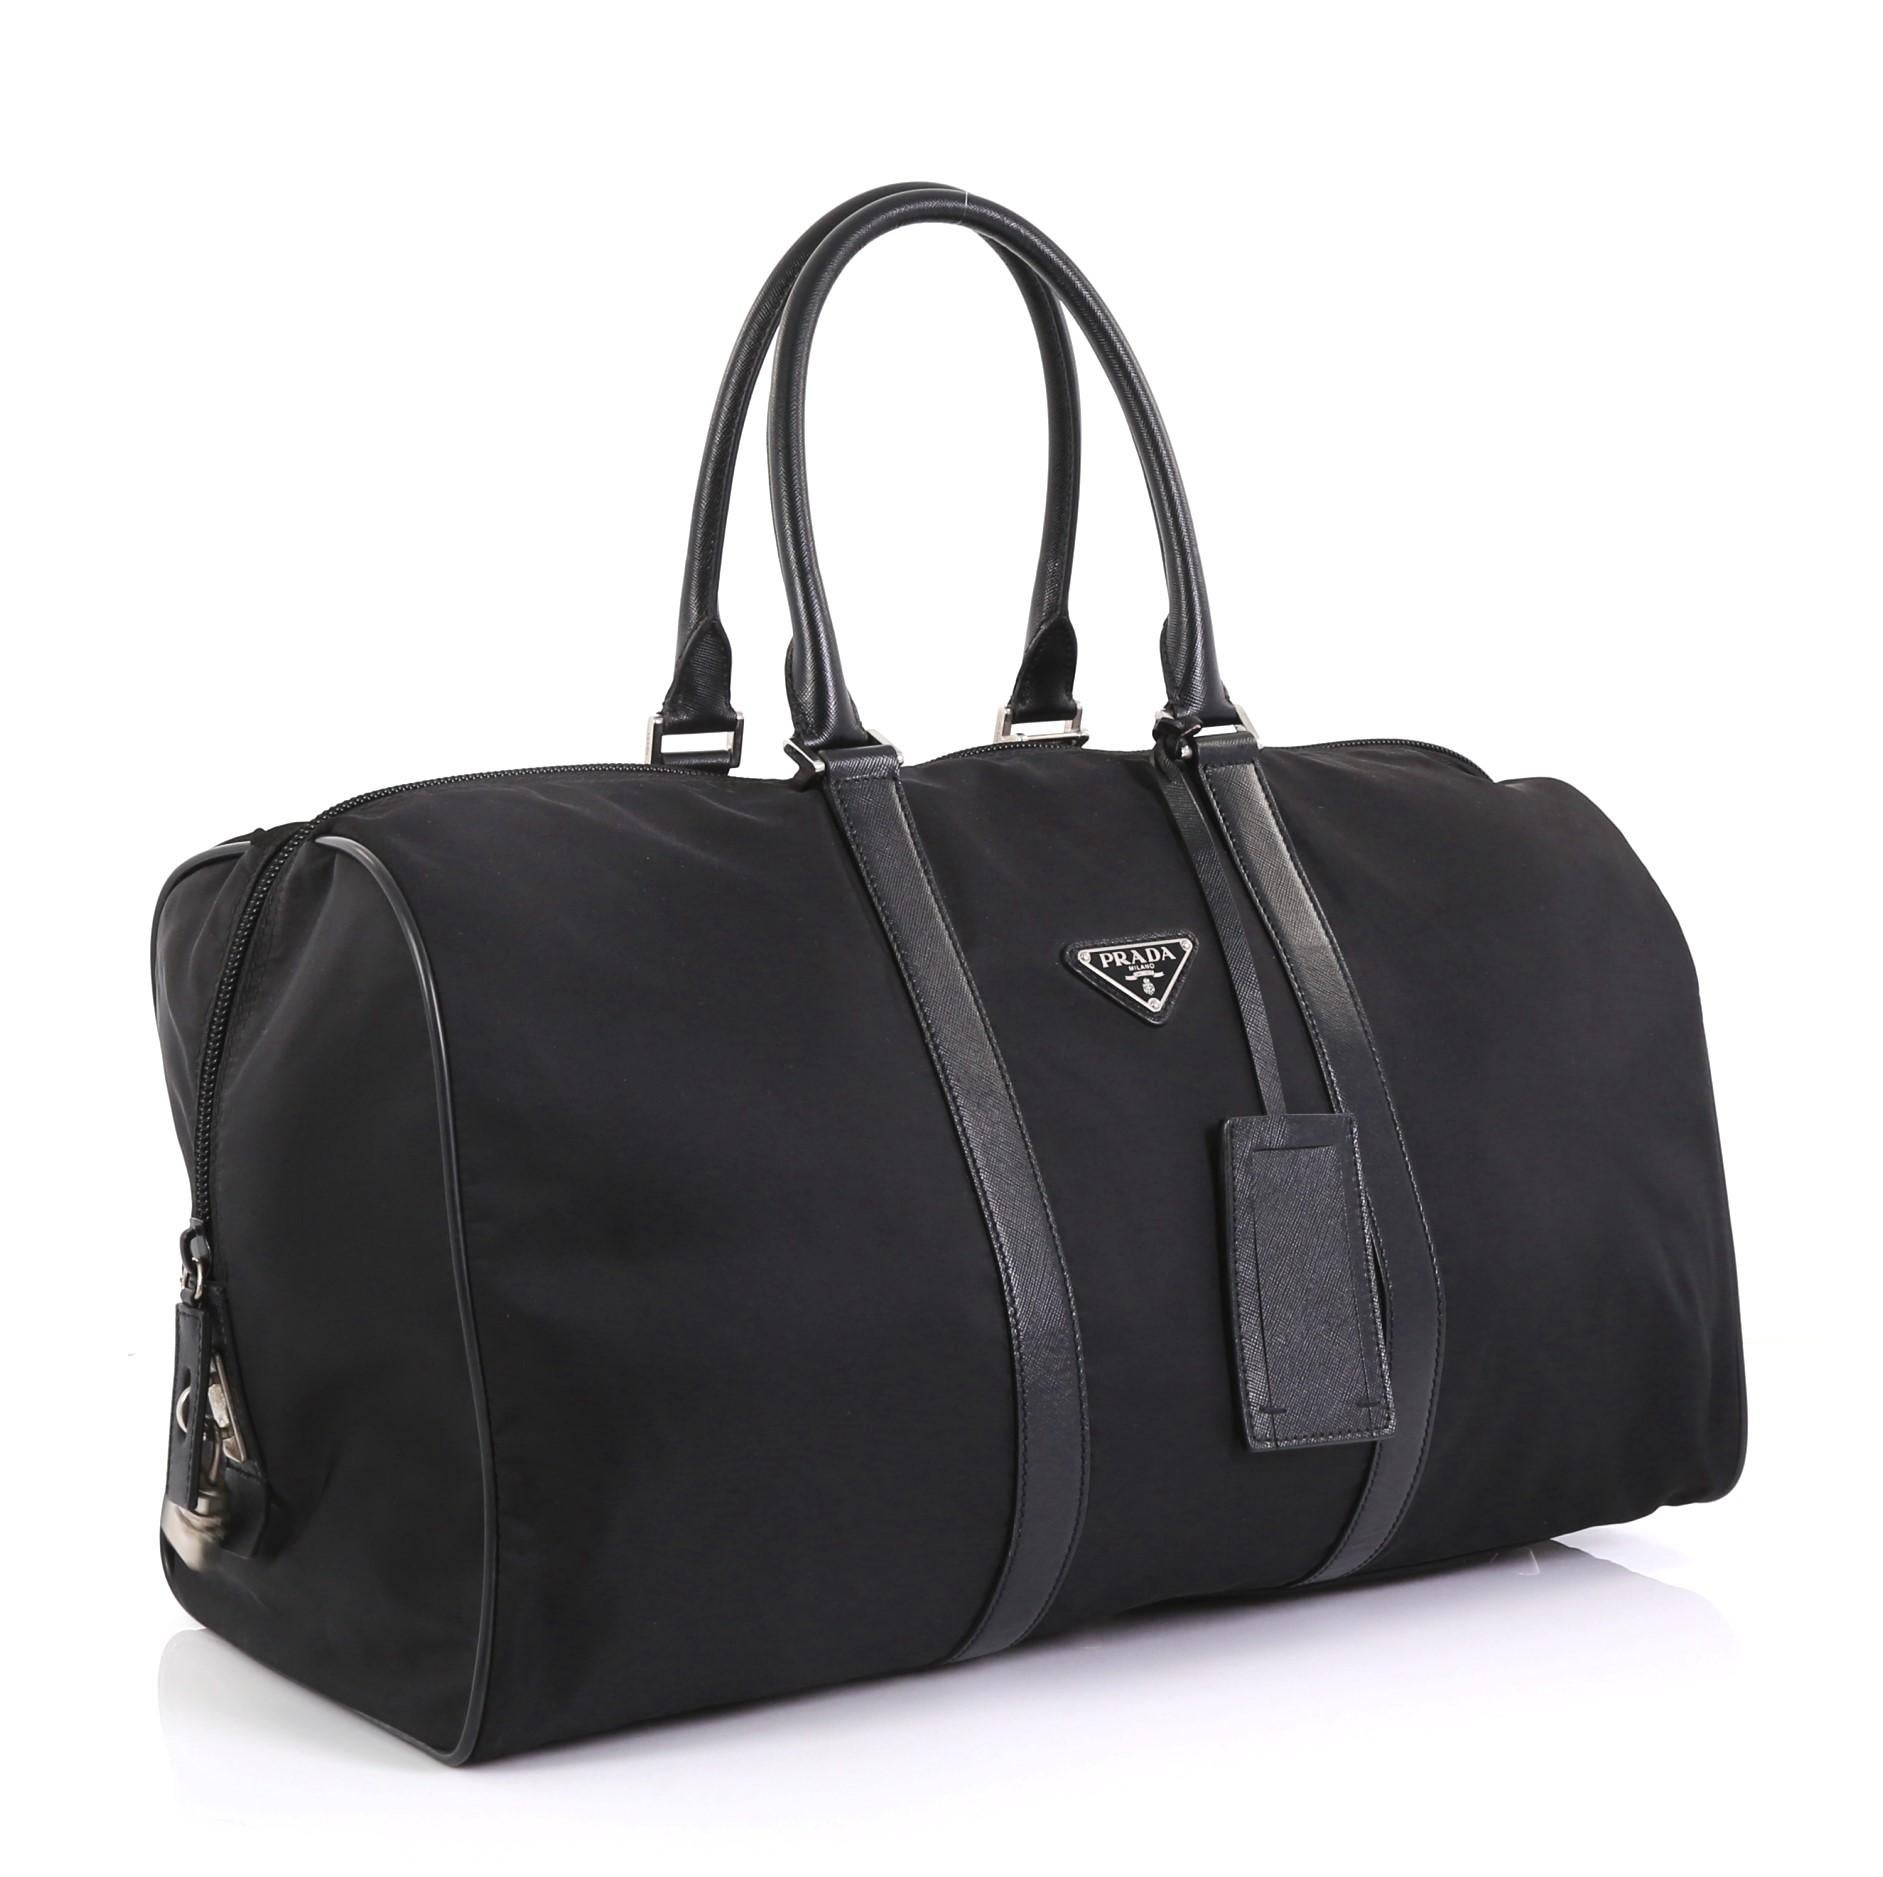 This Prada Convertible Weekender Bag Tessuto with Saffiano Leather Large, crafted with black tessuto, features dual rolled handles, leather trim, inverted triangle Prada logo, and silver-tone hardware. Its top zip closure opens to a black fabric